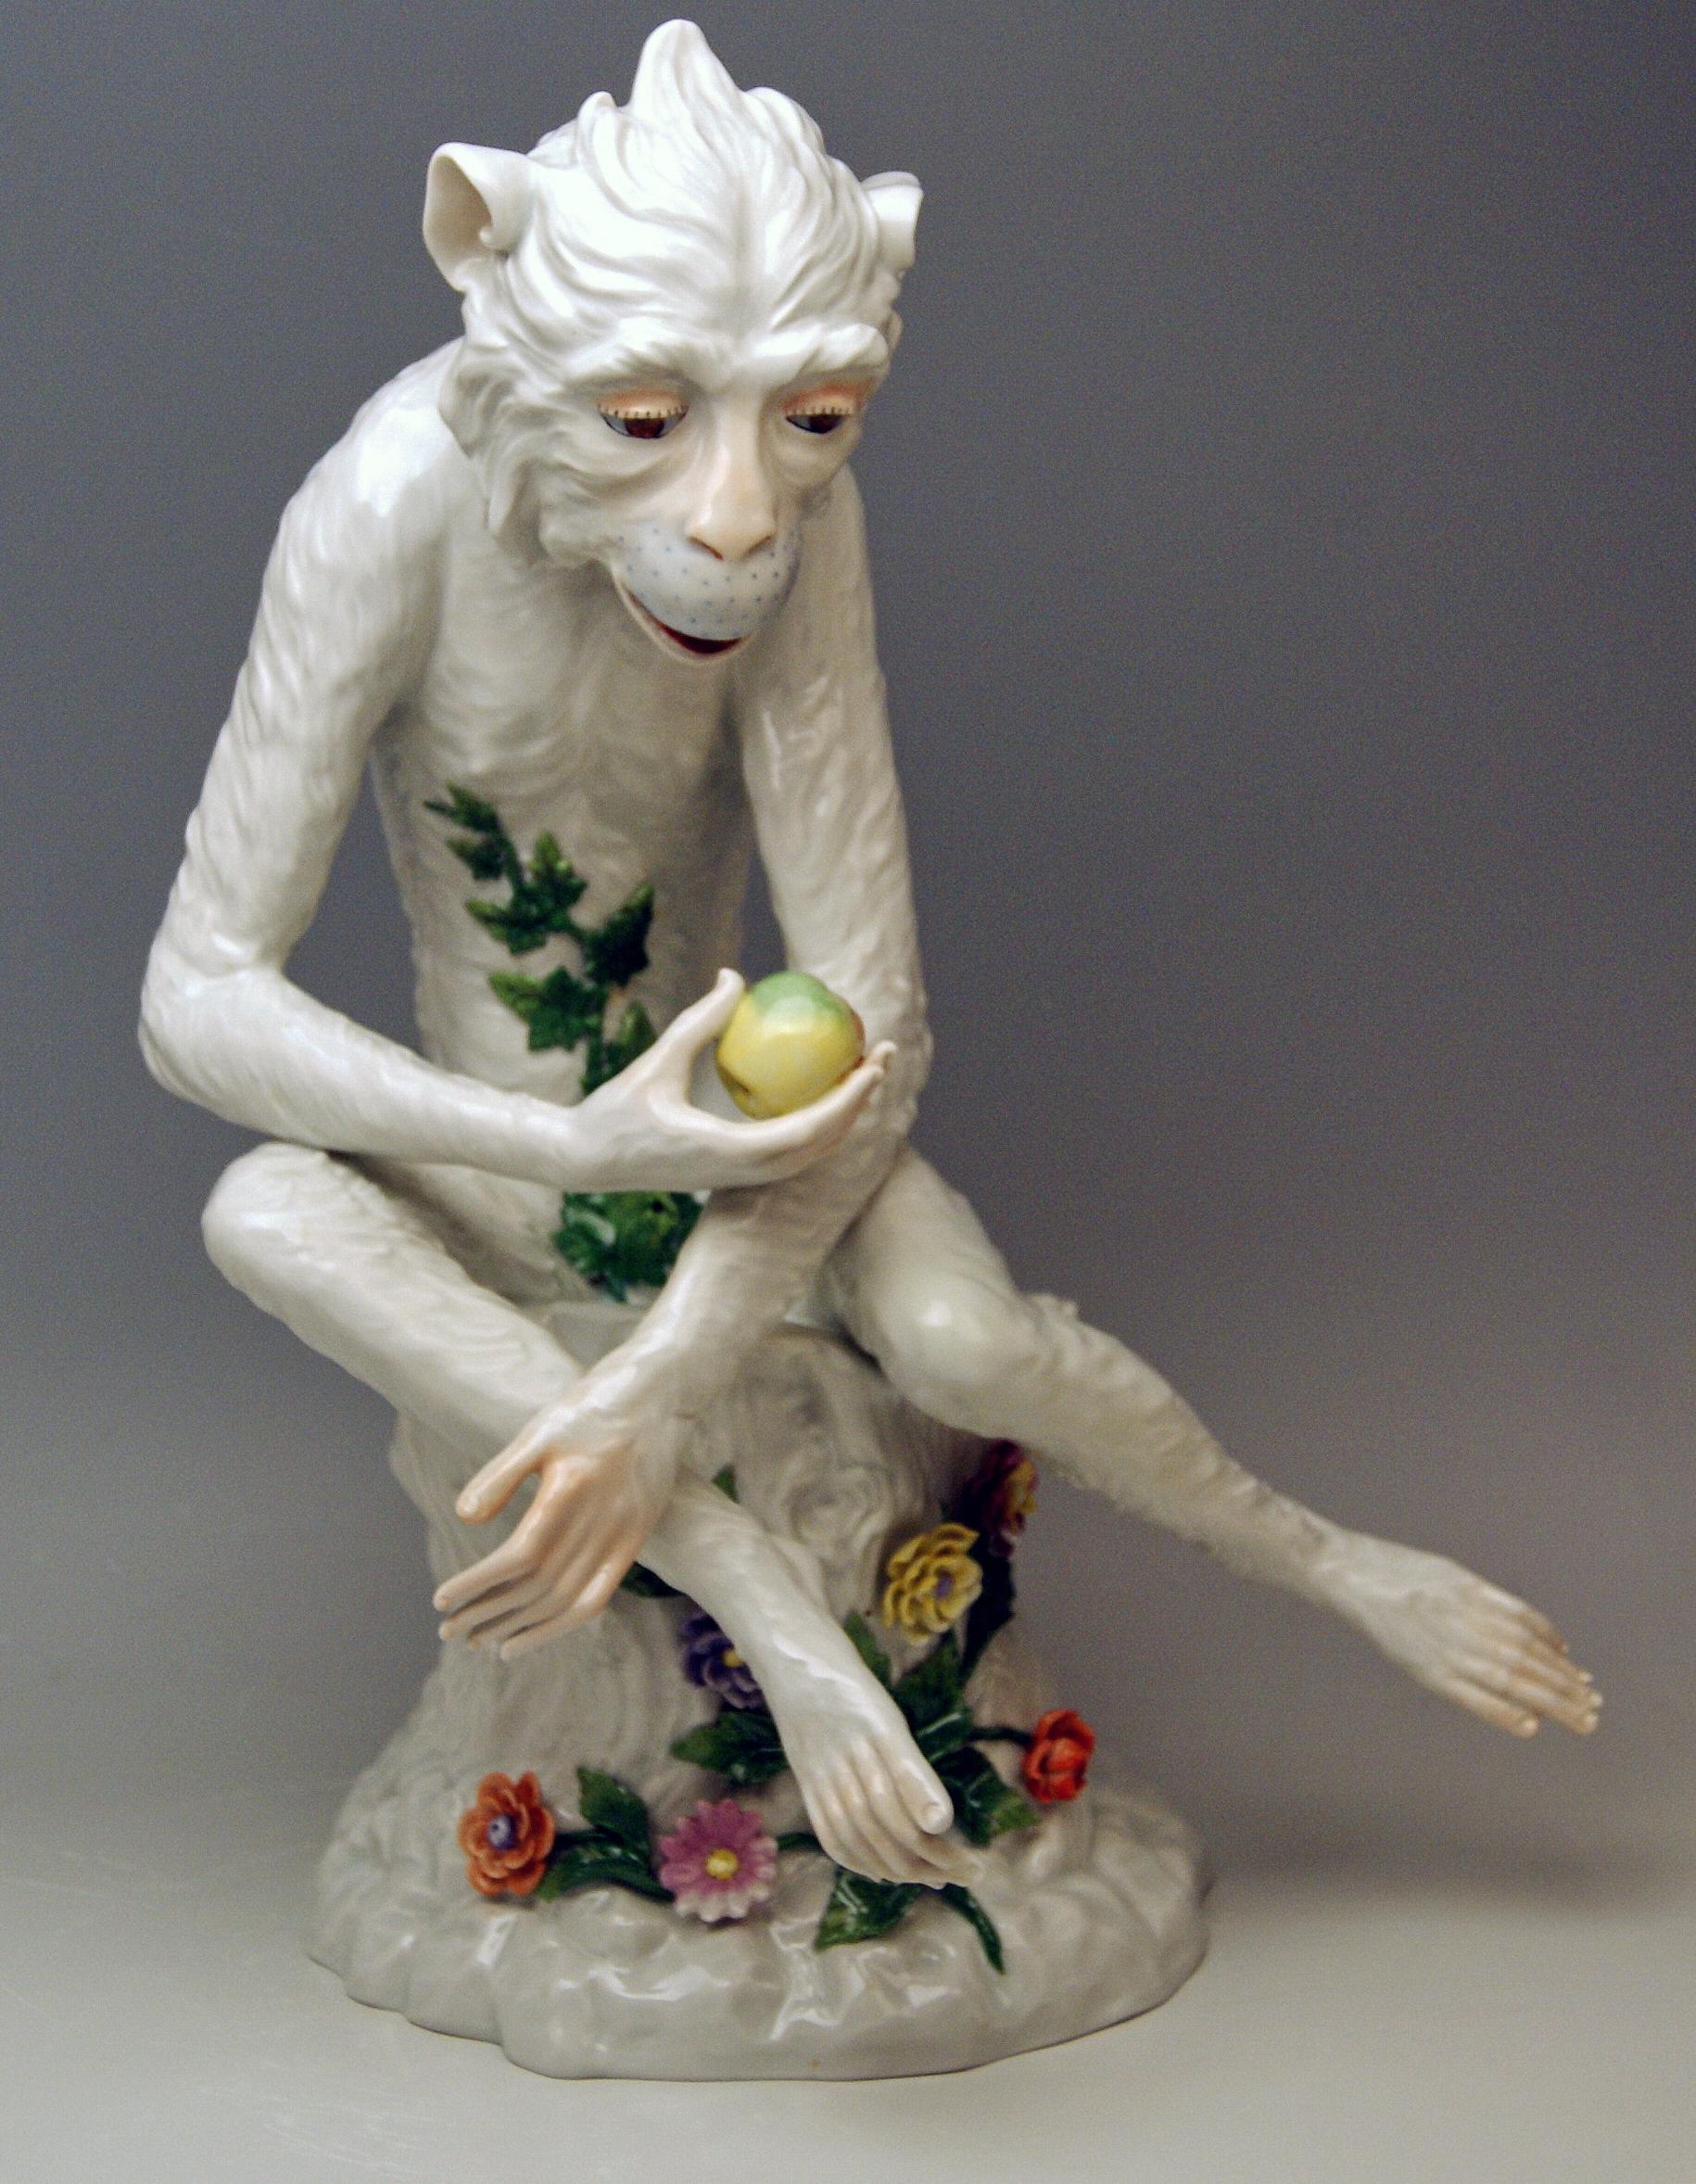 Quite rare porcelain animal figurine:   Tall Monkey with Apple

Manufactory: 
Porcelain Manufactory Carl Thieme / Potschappel, Freital near Dresden  (Potschappel is one of the 15 quarters of Saxon district town Freital of county Saxon